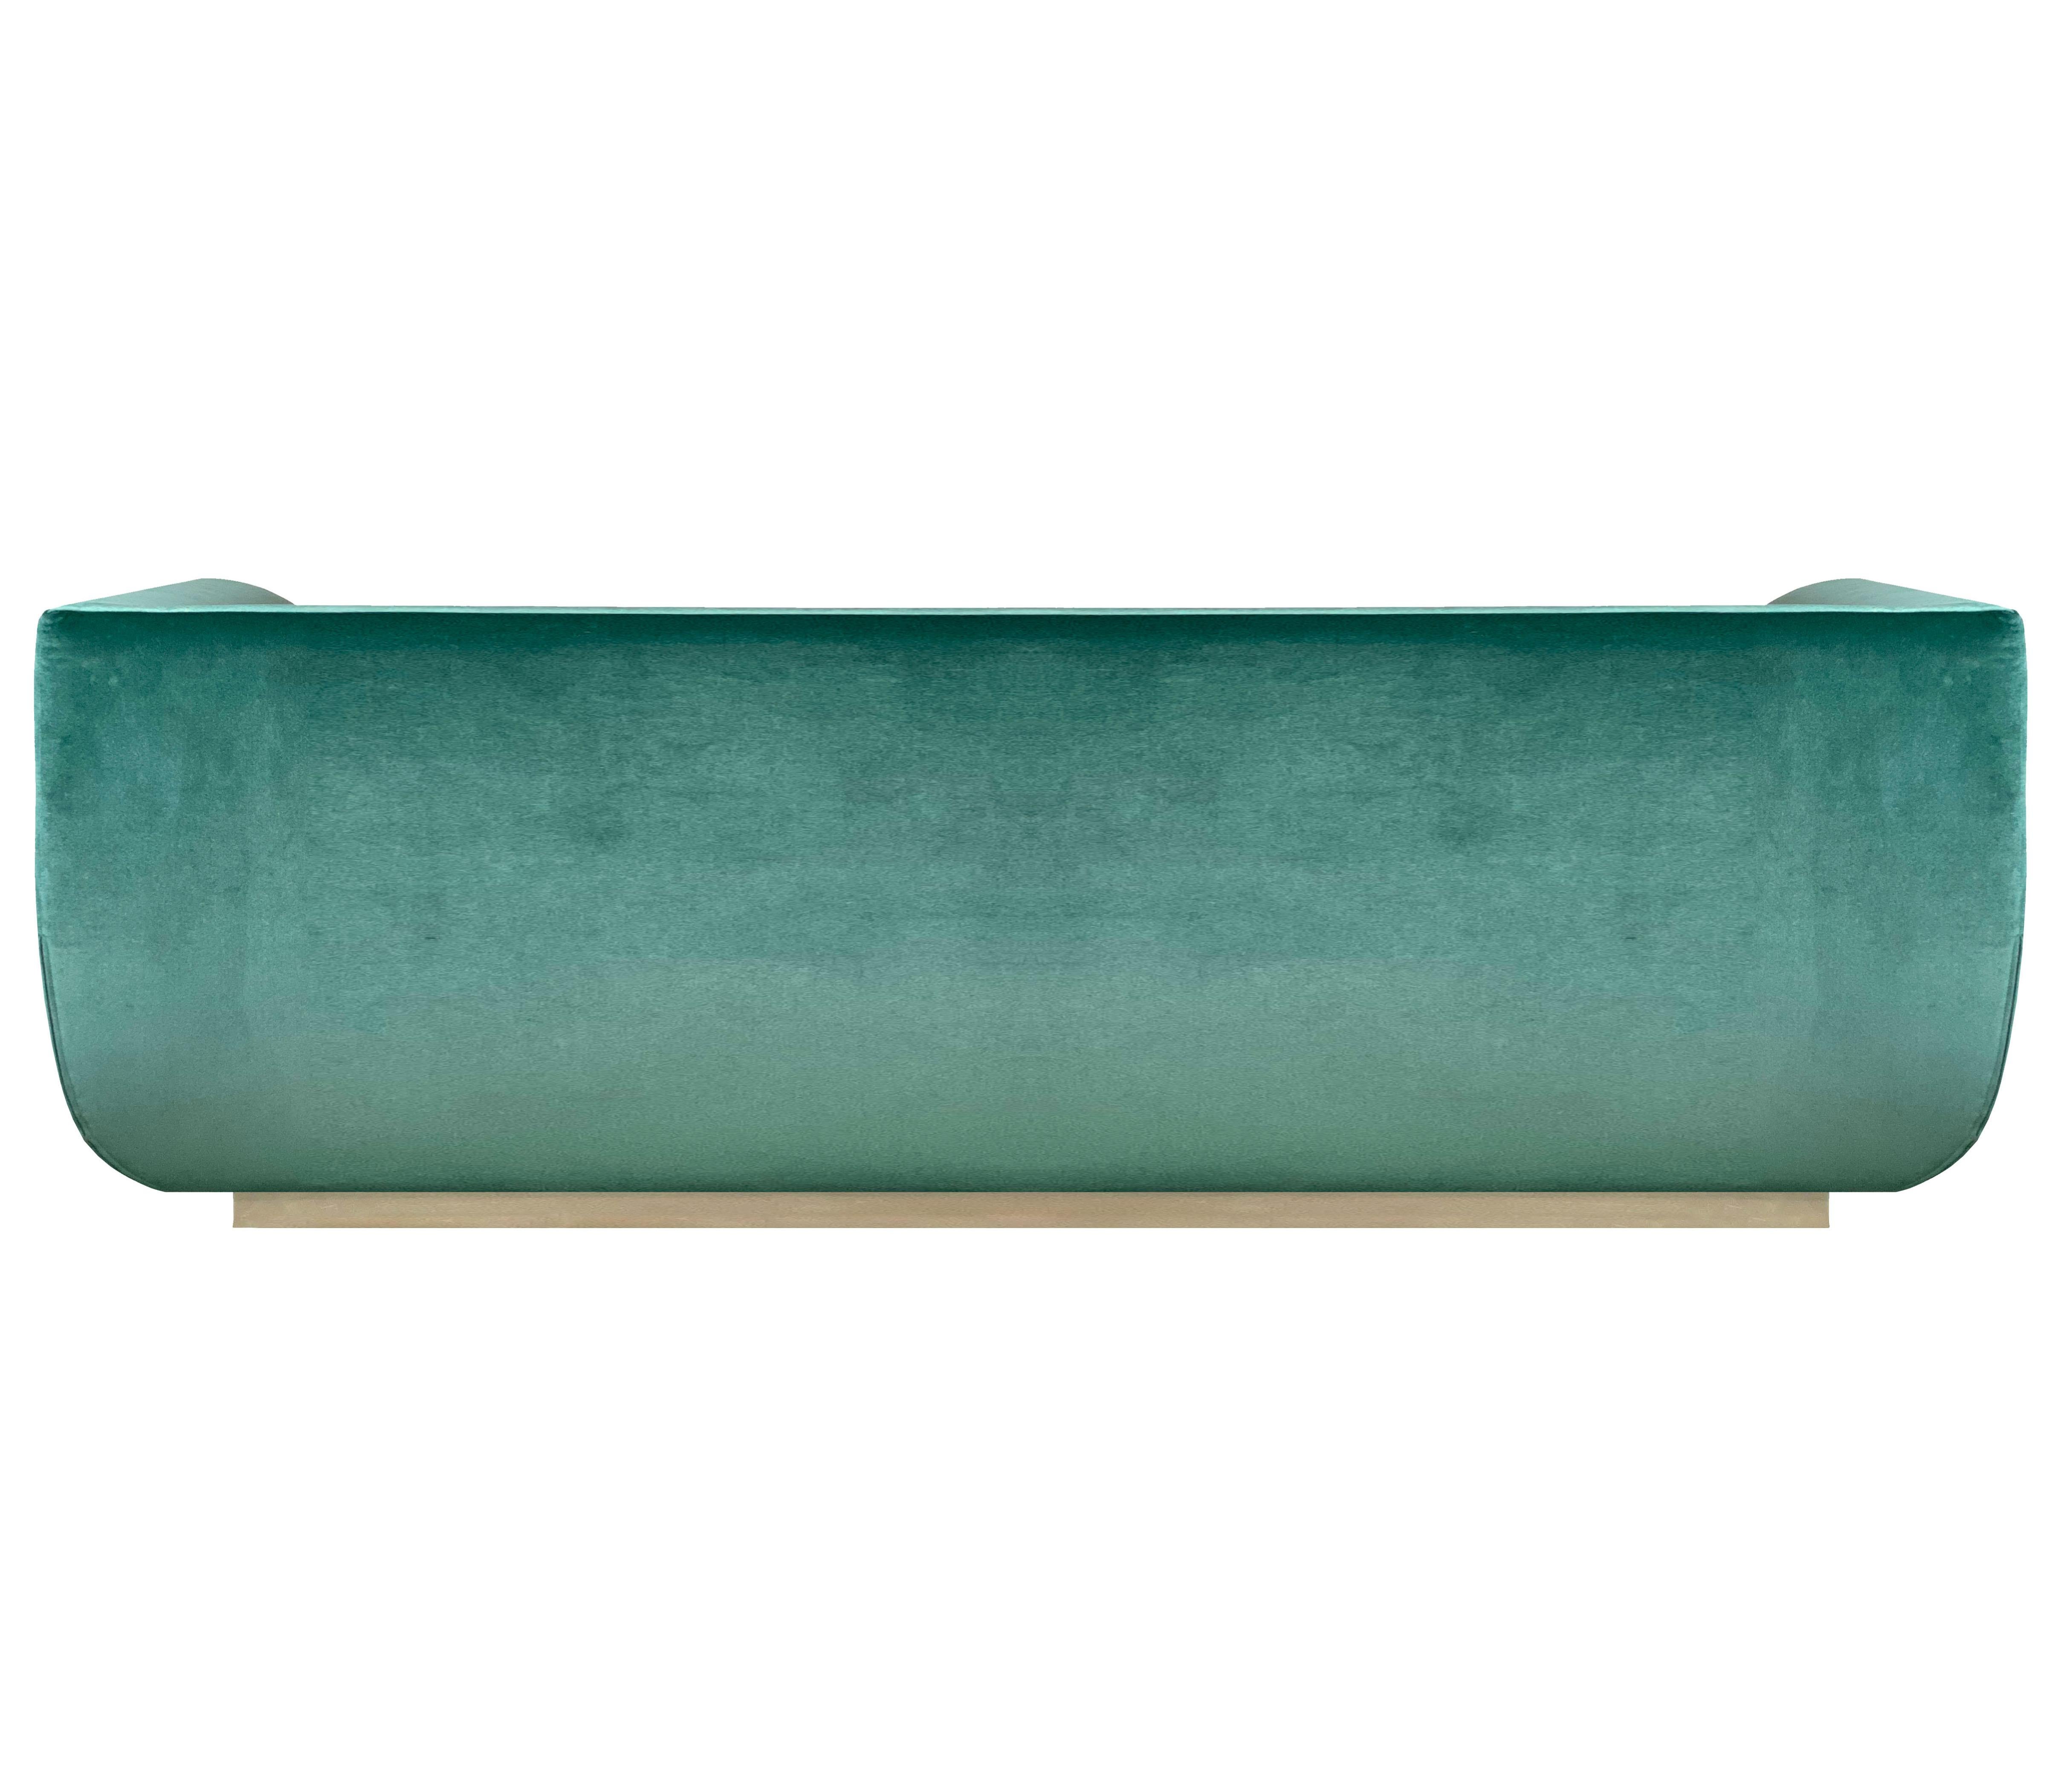 “ABYSS” sofa in mint and ocean blue velvet 

When you look into an abyss, the abyss also looks into you.

The abyssal zone or abyssopelagic zone is a layer of the pelagic zone of the ocean. 